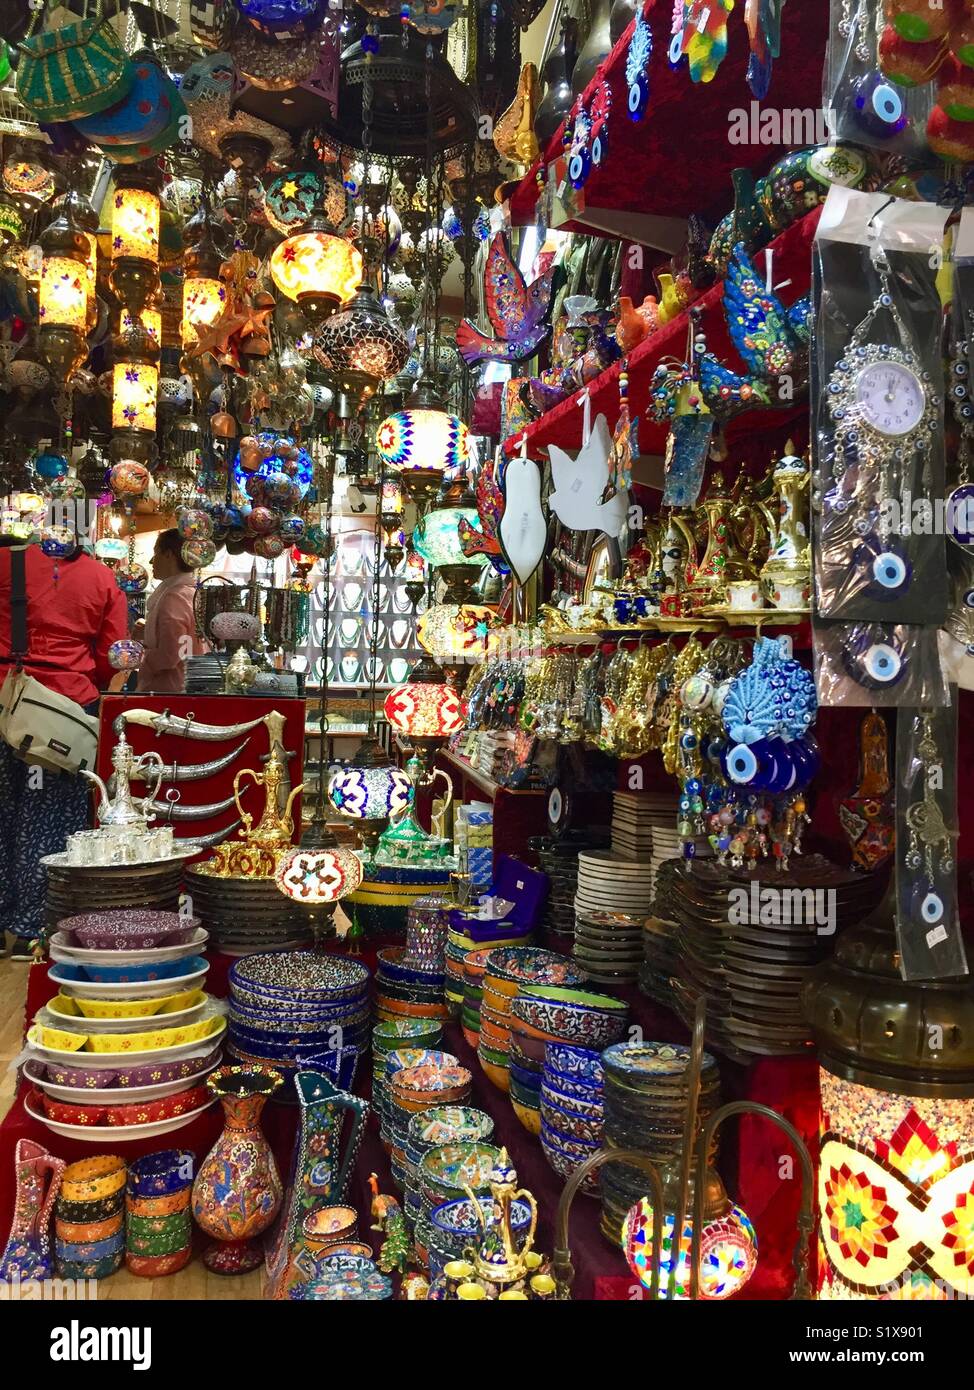 Shop in Muscat souq Stock Photo